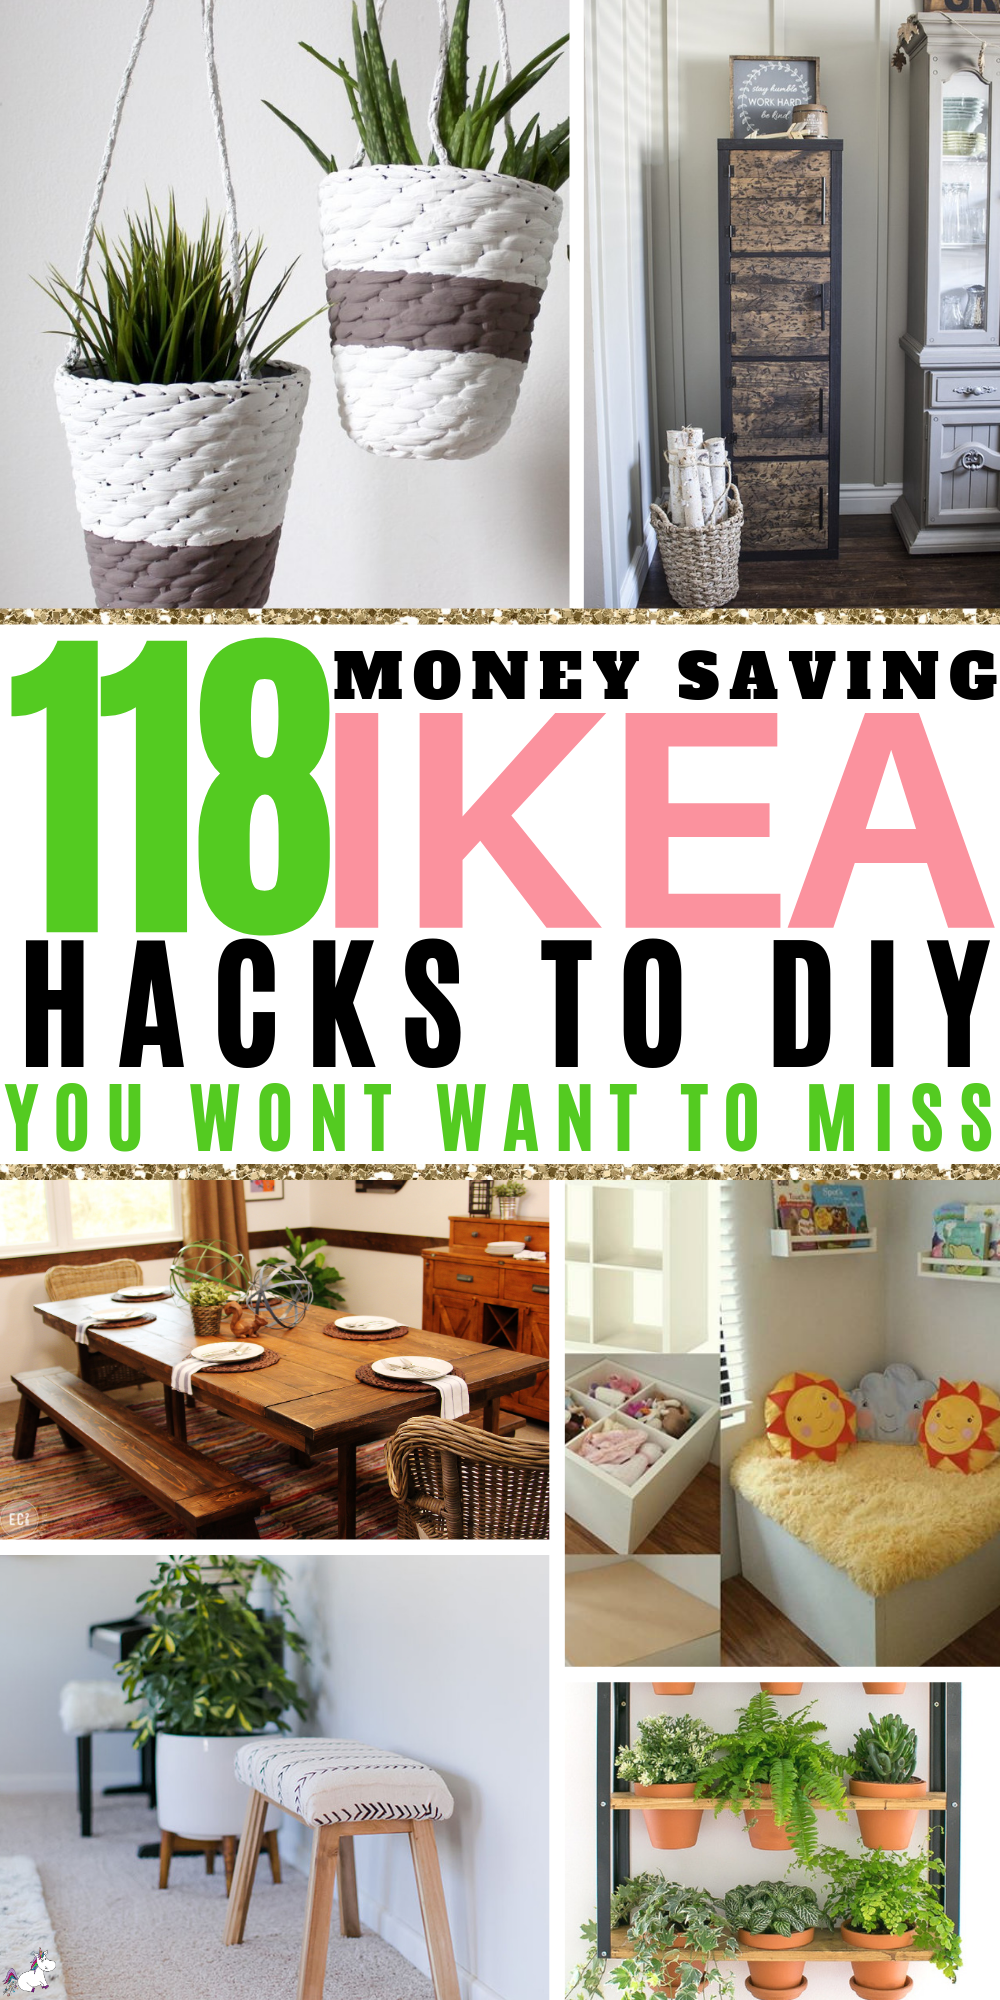 128 Best IKEA Hacks You Shouldn't Miss [Updated 2020] | The Mummy Front - 128 Best IKEA Hacks You Shouldn't Miss [Updated 2020] | The Mummy Front -   25 diy Decorations on a budget ideas